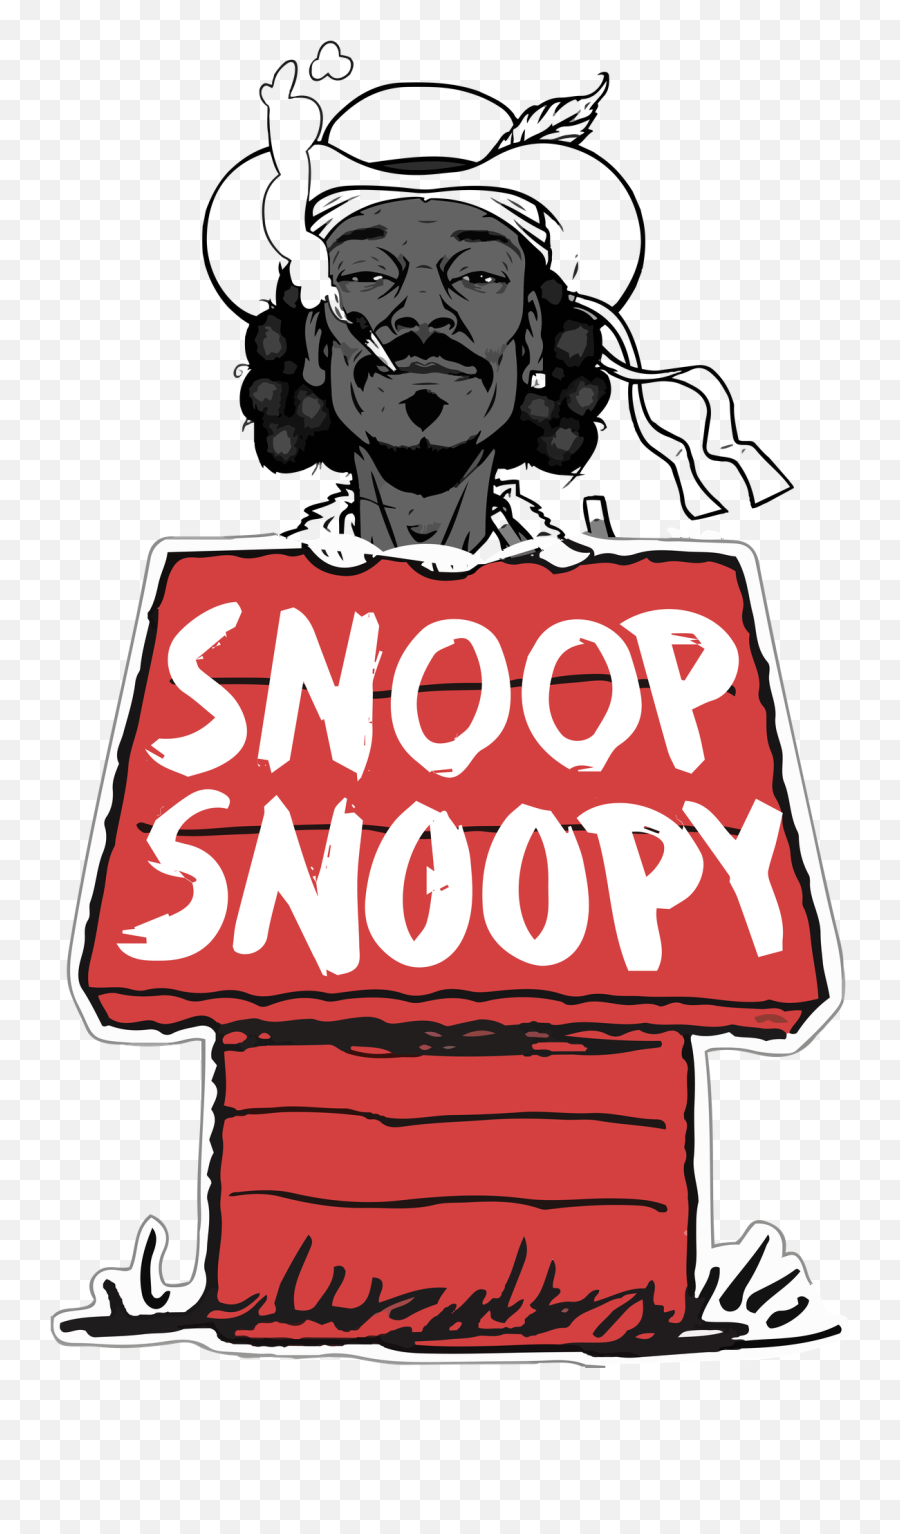 Snoop Dogg Snoopy T Shirts - Snoop Dogg Snoopy T Shirt Wattpad Snoopy And Snoop Dogg Png,Snoop Dogg Png